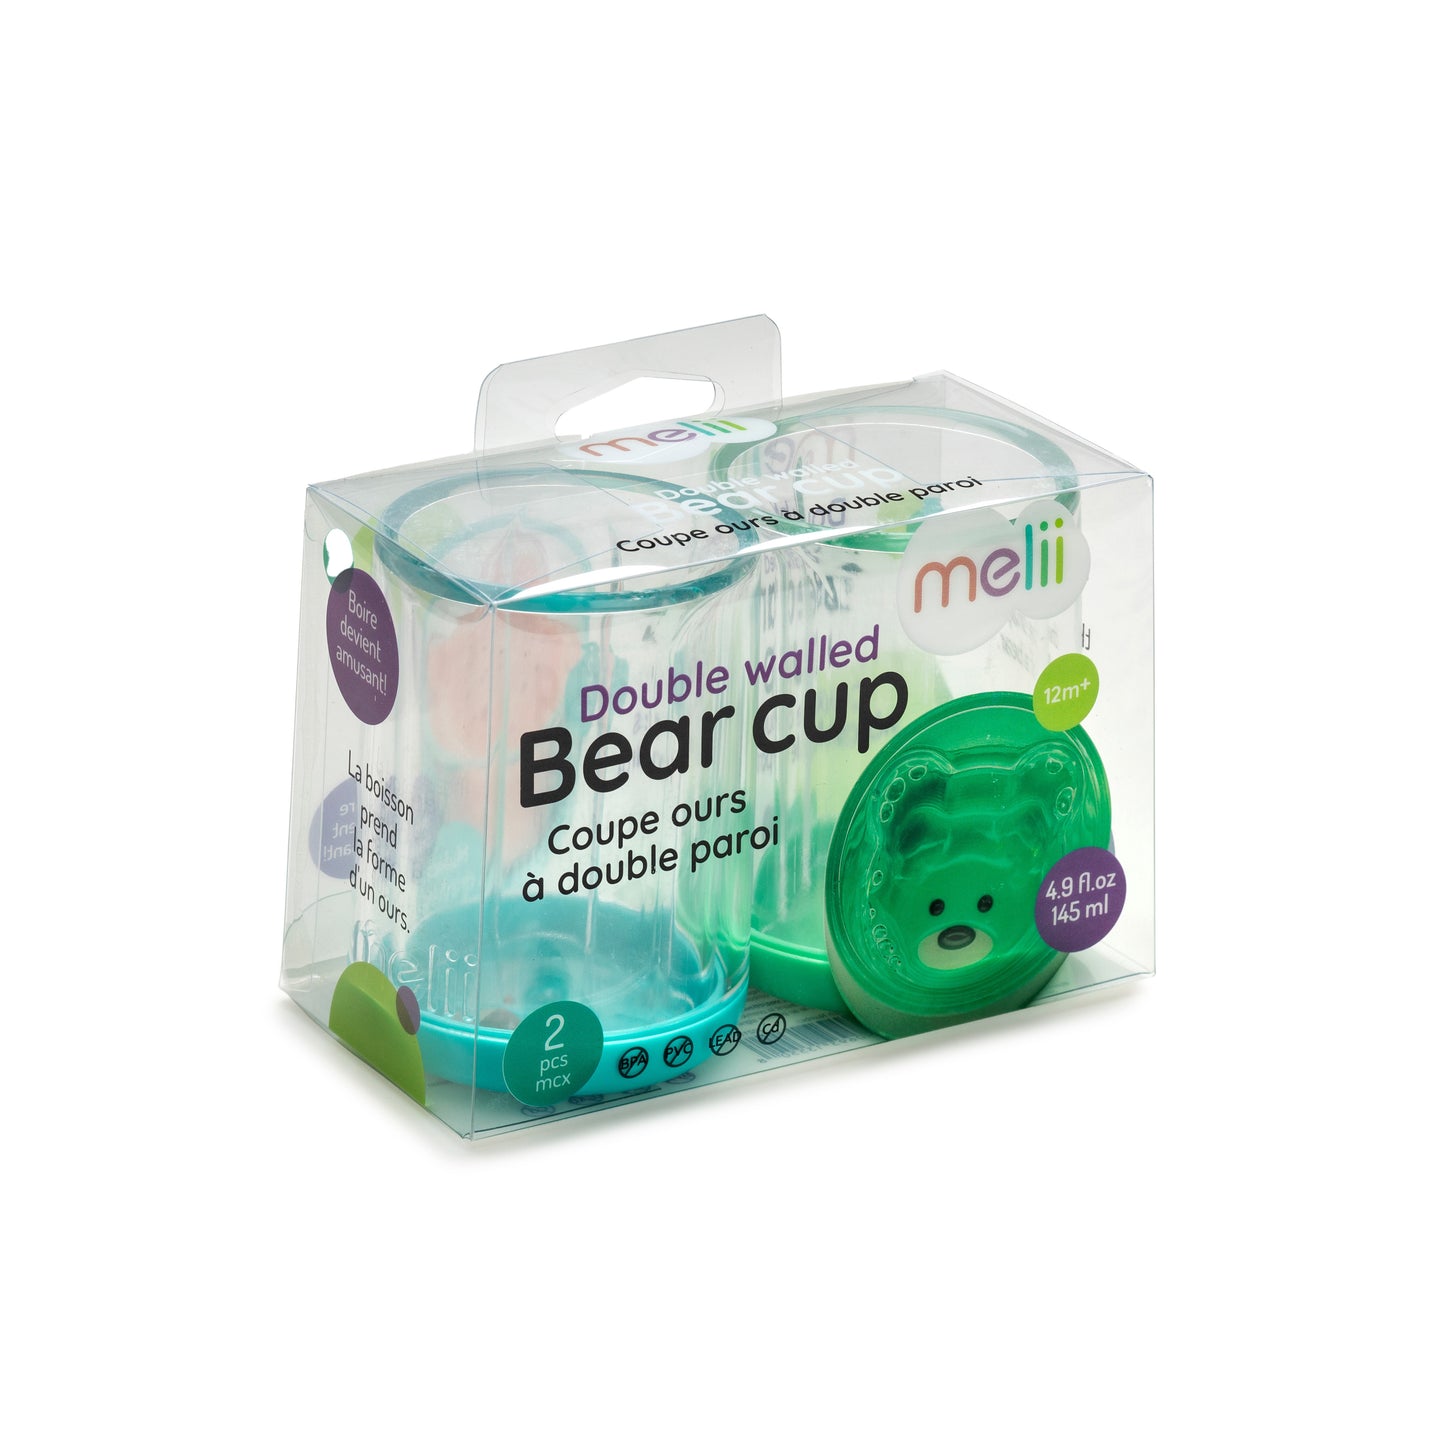 melii Double Walled Bear Cup for Kids 2 Pack, 145 ml - Fun and Unique Beverage Experience, BPA-Free, Easy to Clean, Ideal for Babies, Toddlers, and Children